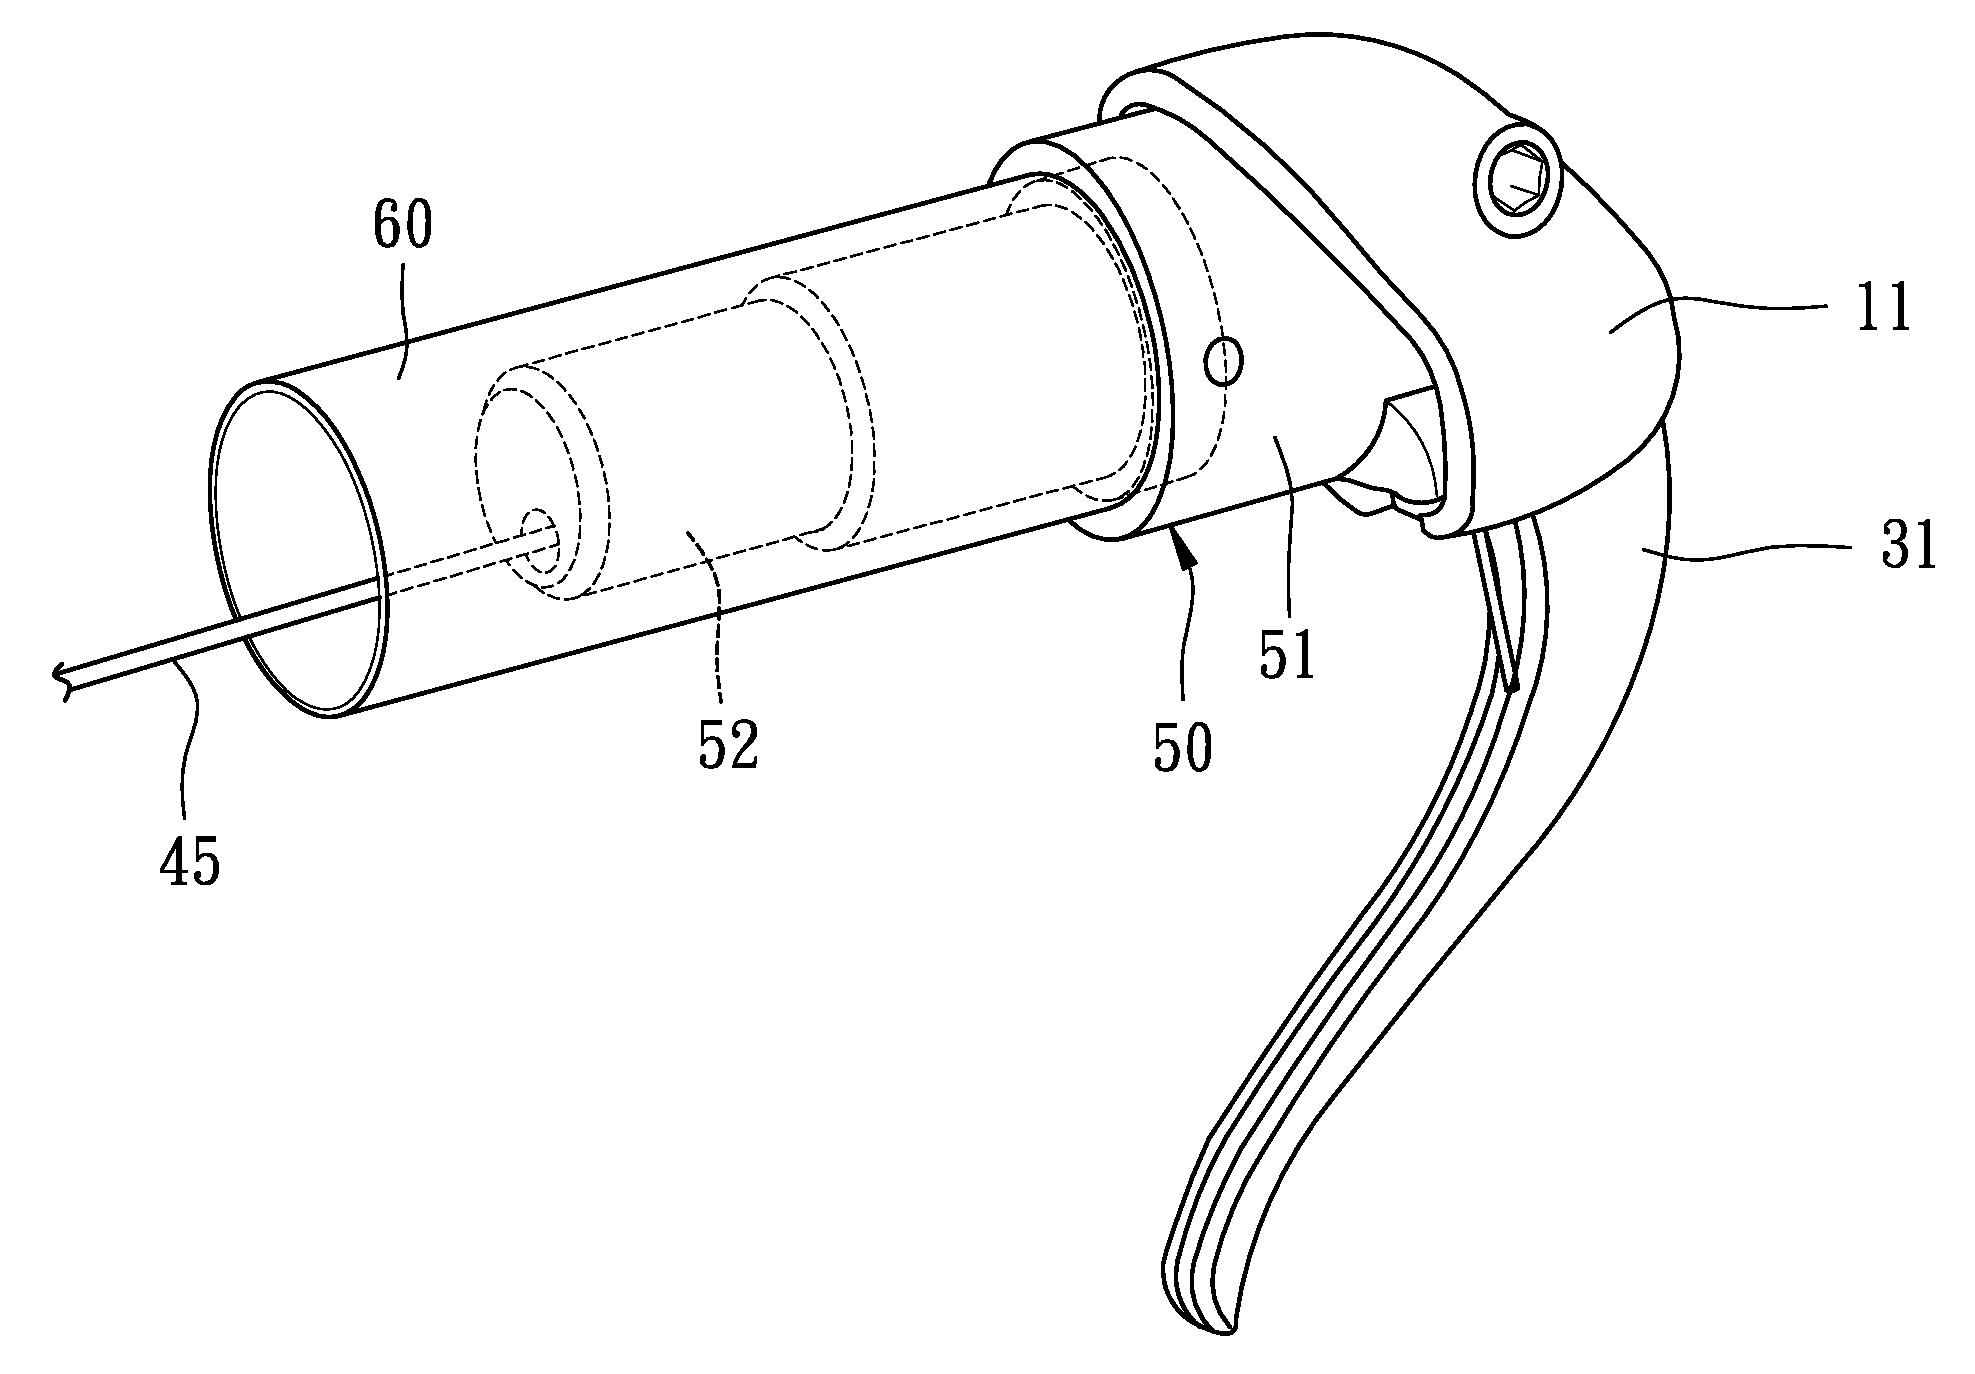 Bicycle shift control device